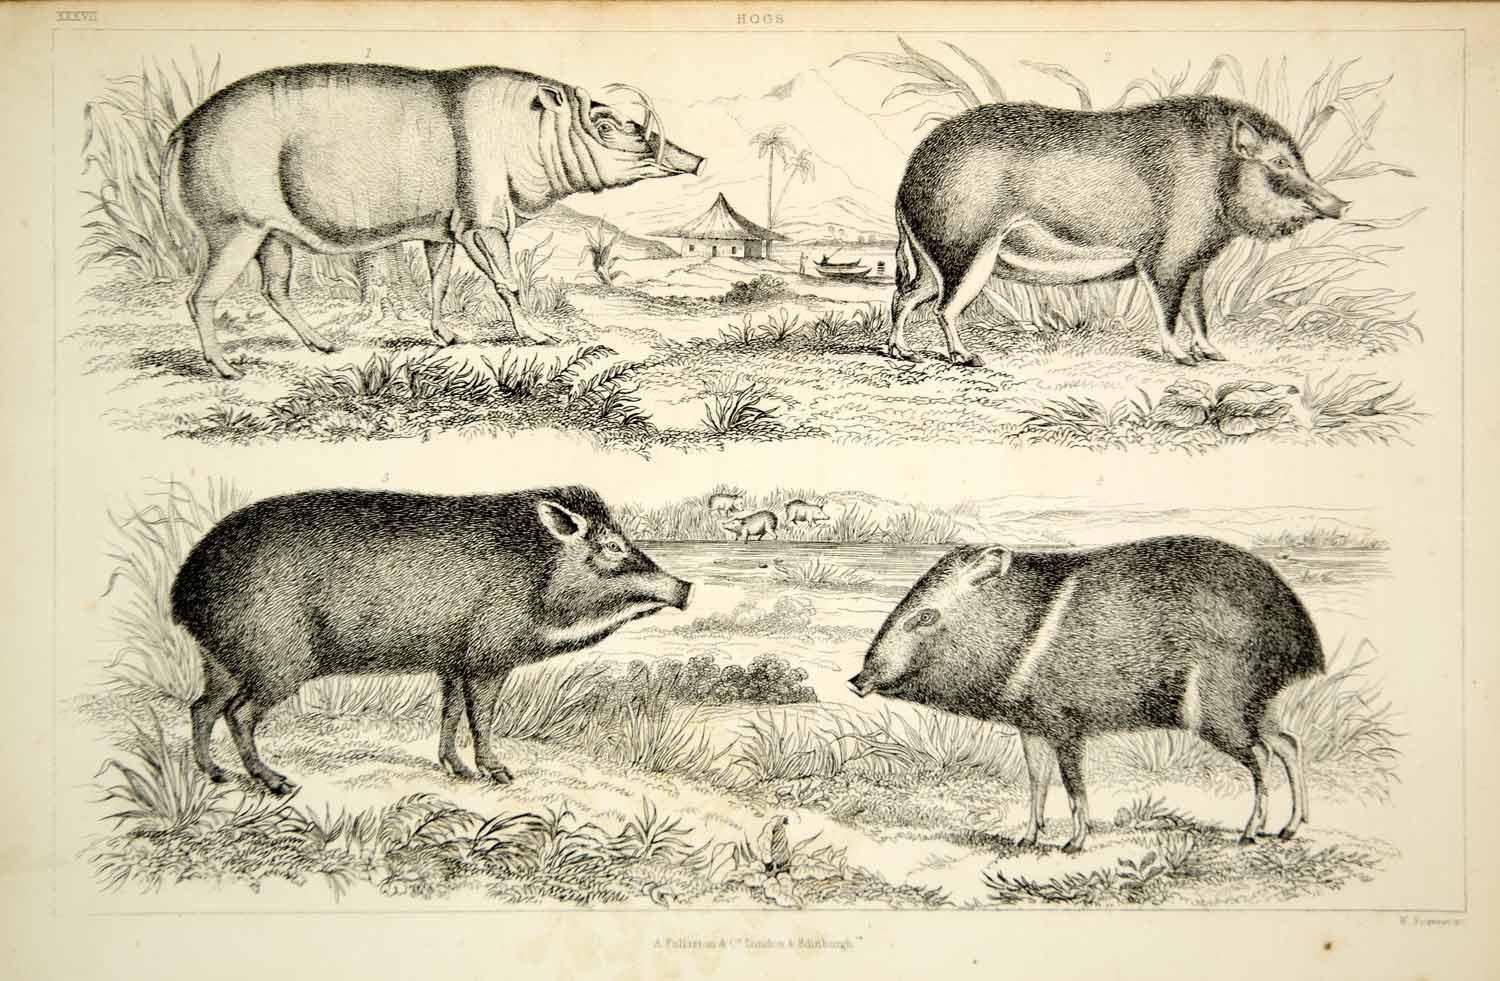 1852 Steel Engraving Antique Print Hogs Chinese Pig Pork Agriculture Farming FD1